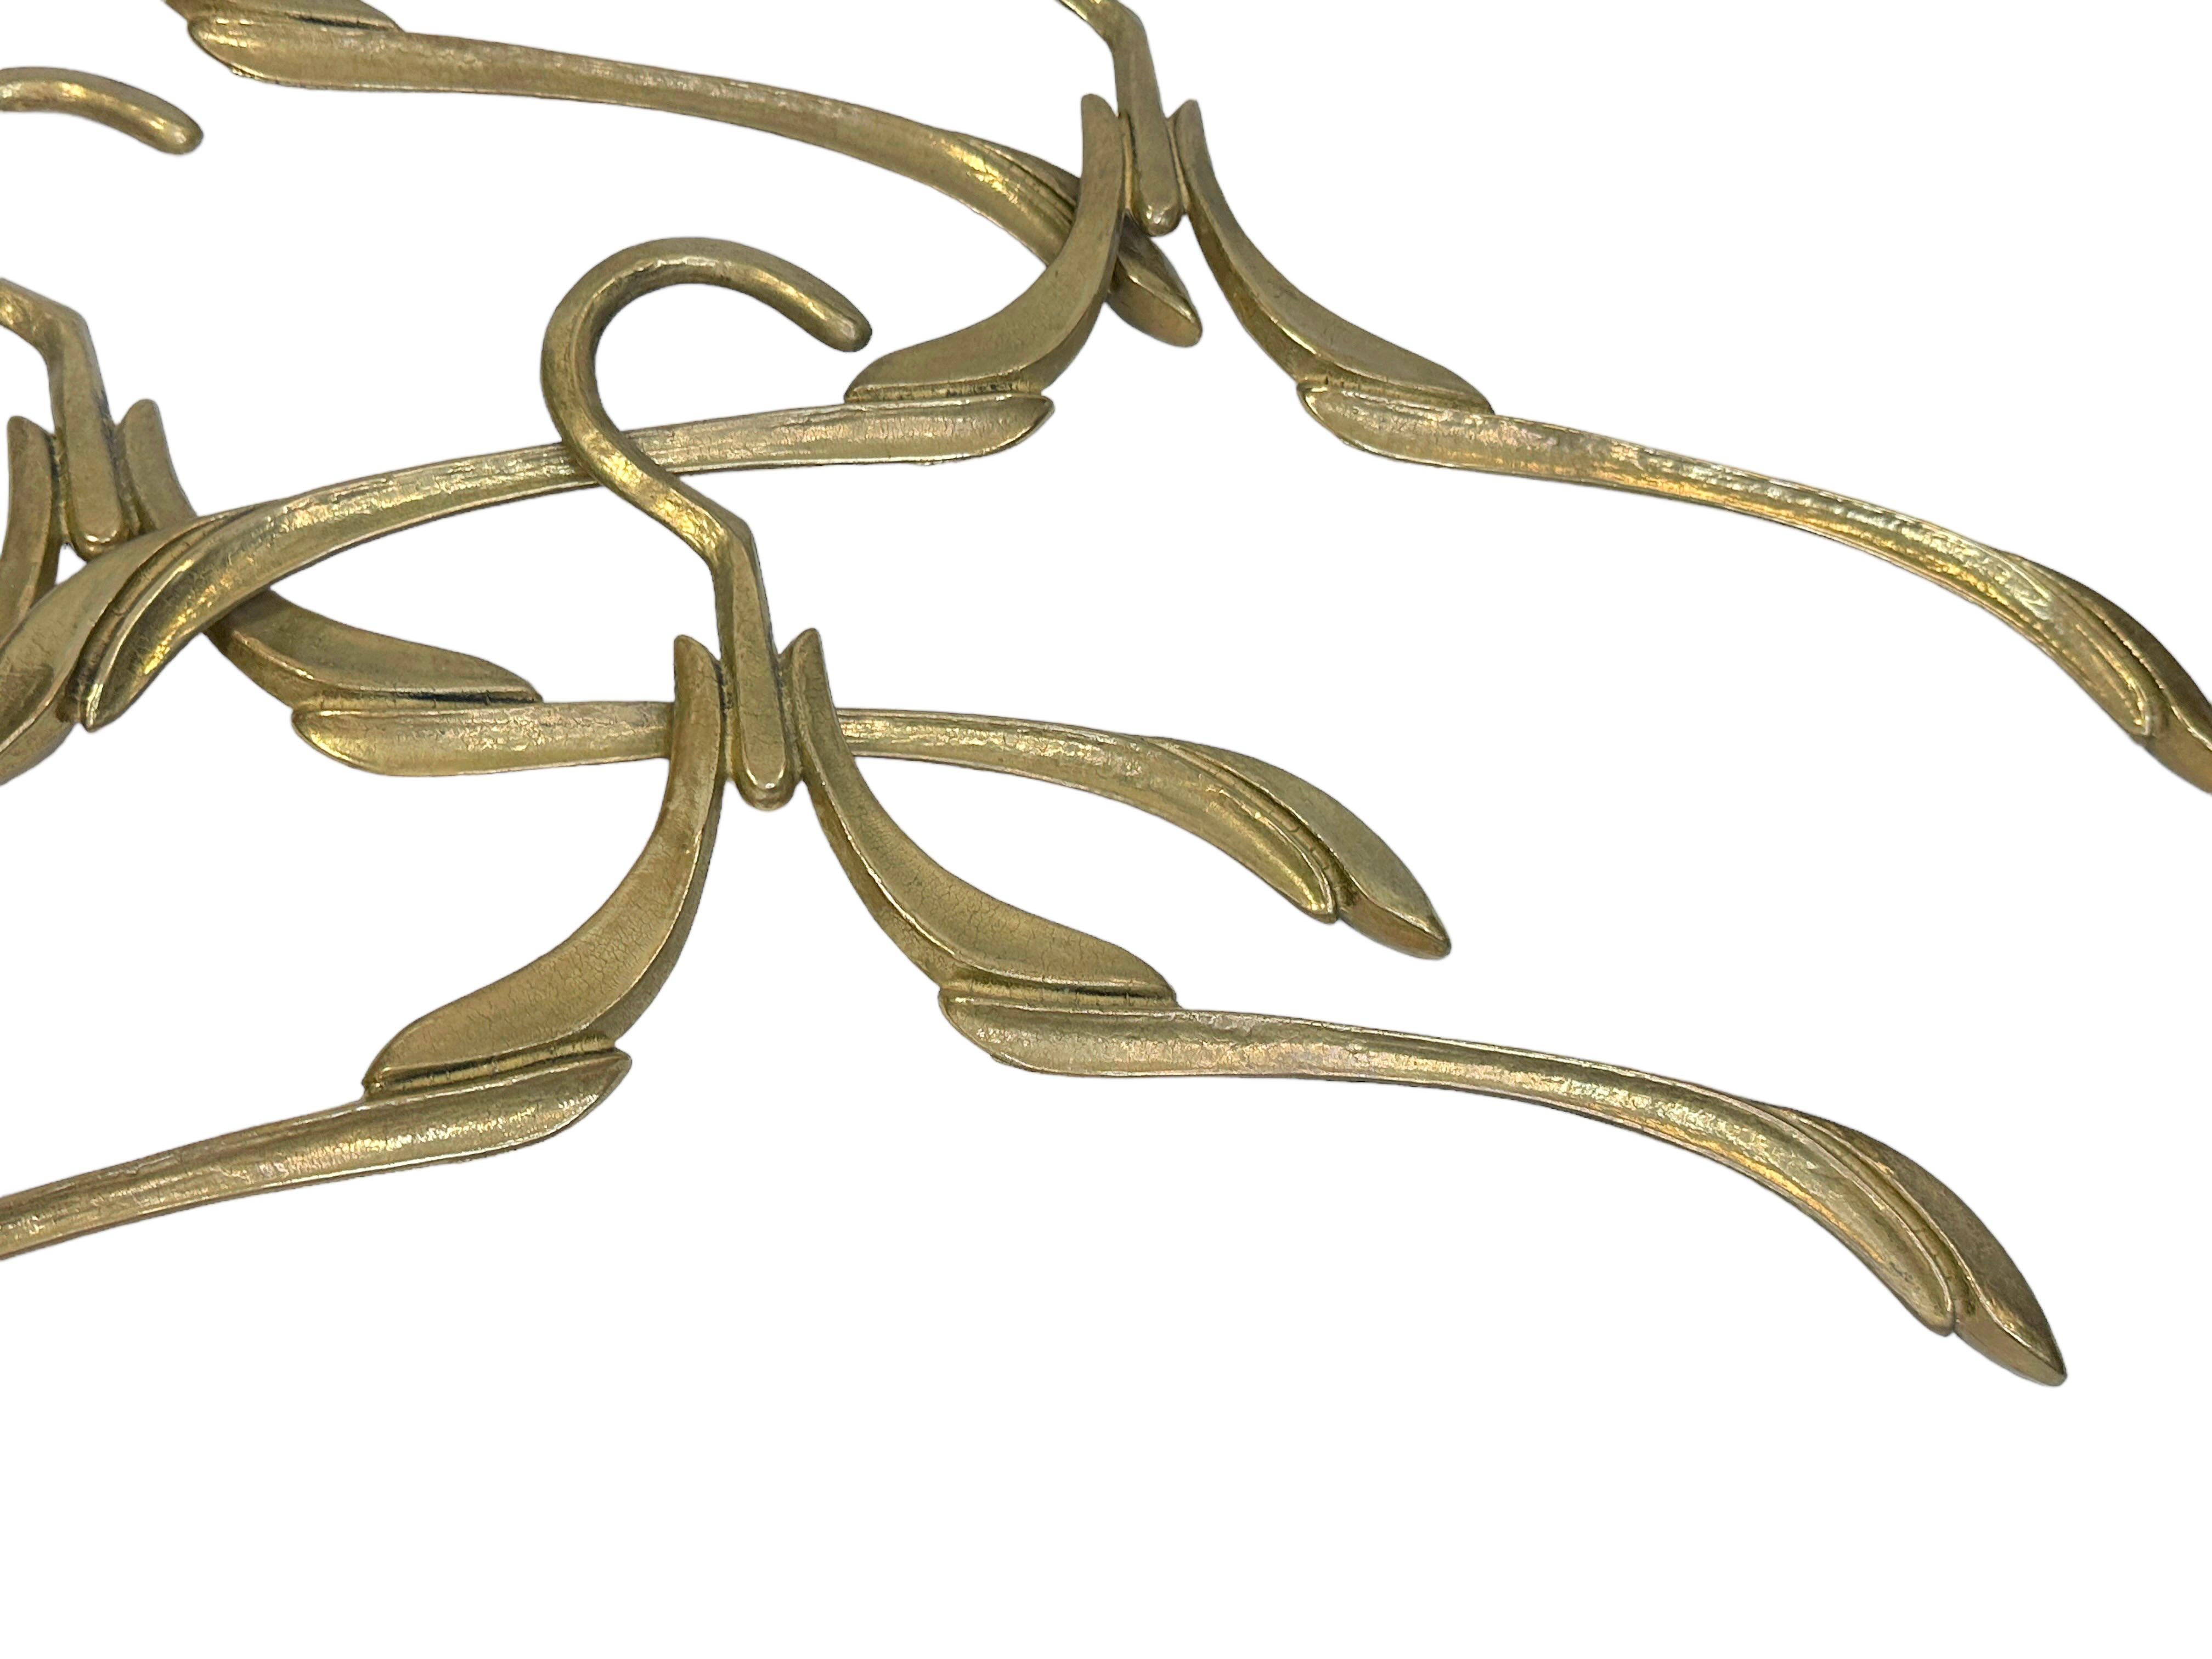 Mid-20th Century Set of Four Coat Hangers, Art Nouveau Style Solid Brass, Vintage 1950s to 1960s  For Sale